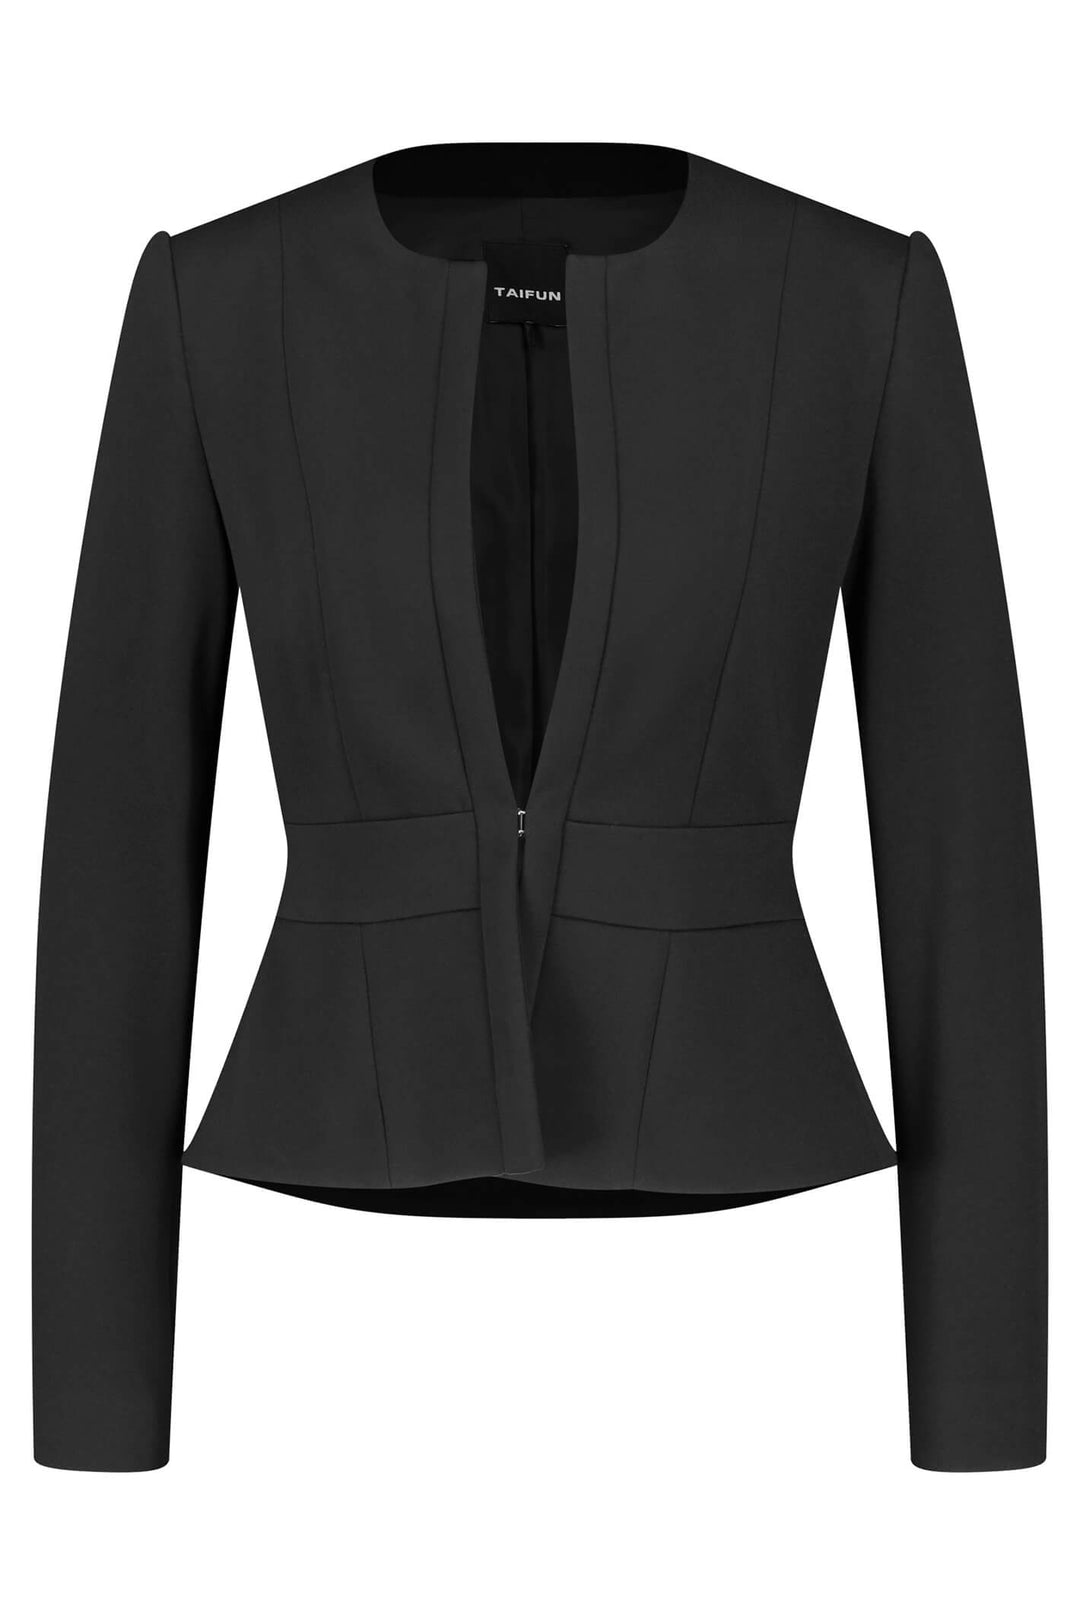 Taifun 930995 Black Tailored Jacket - Experience Boutique